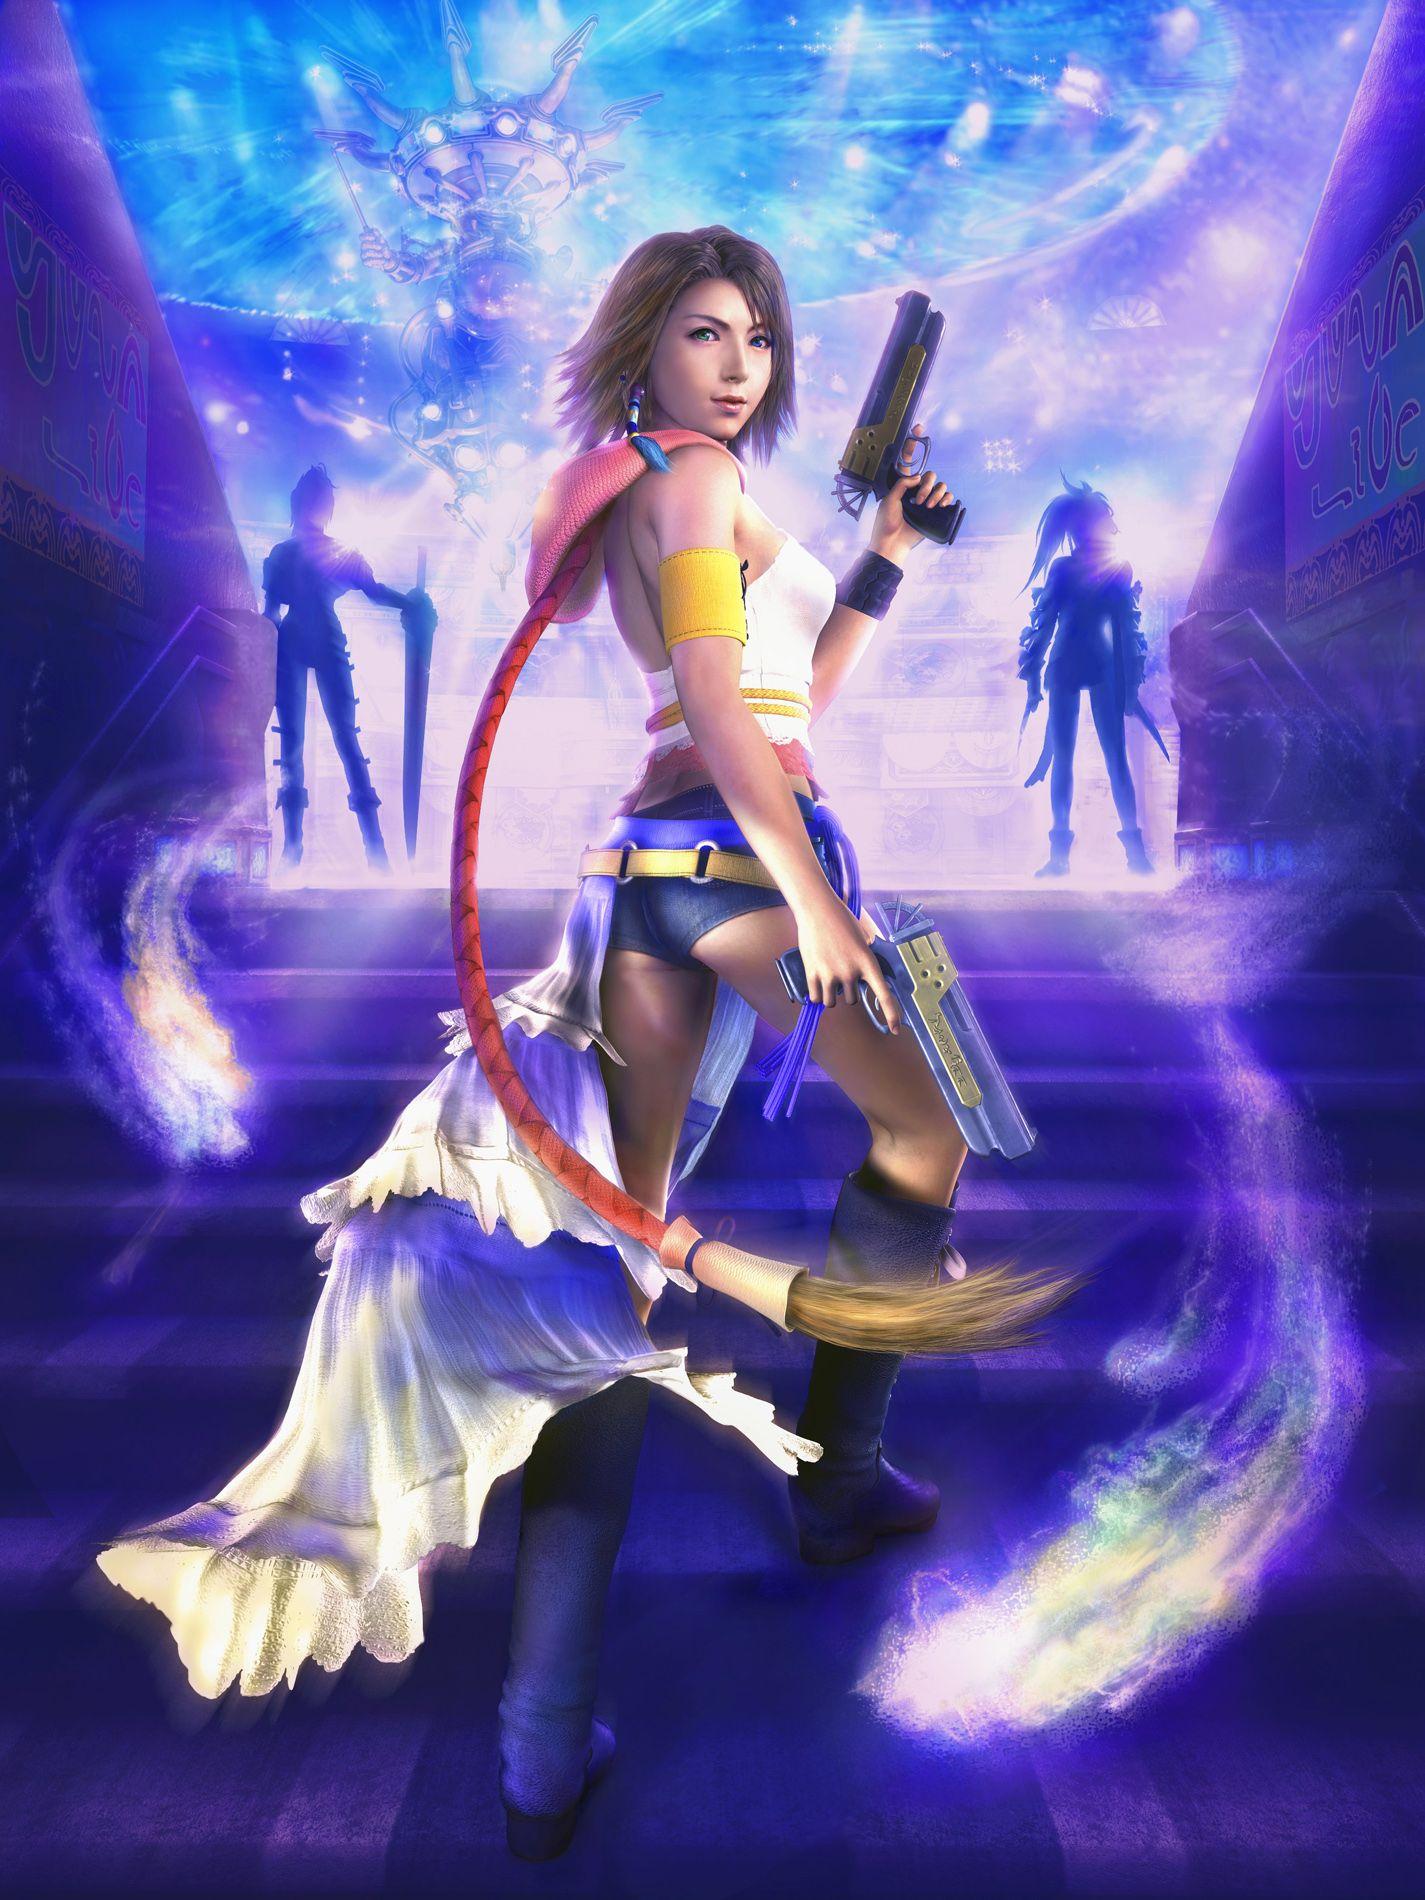 Final Fantasy X 2 Image Picture From FFX 2 HD Wallpaper